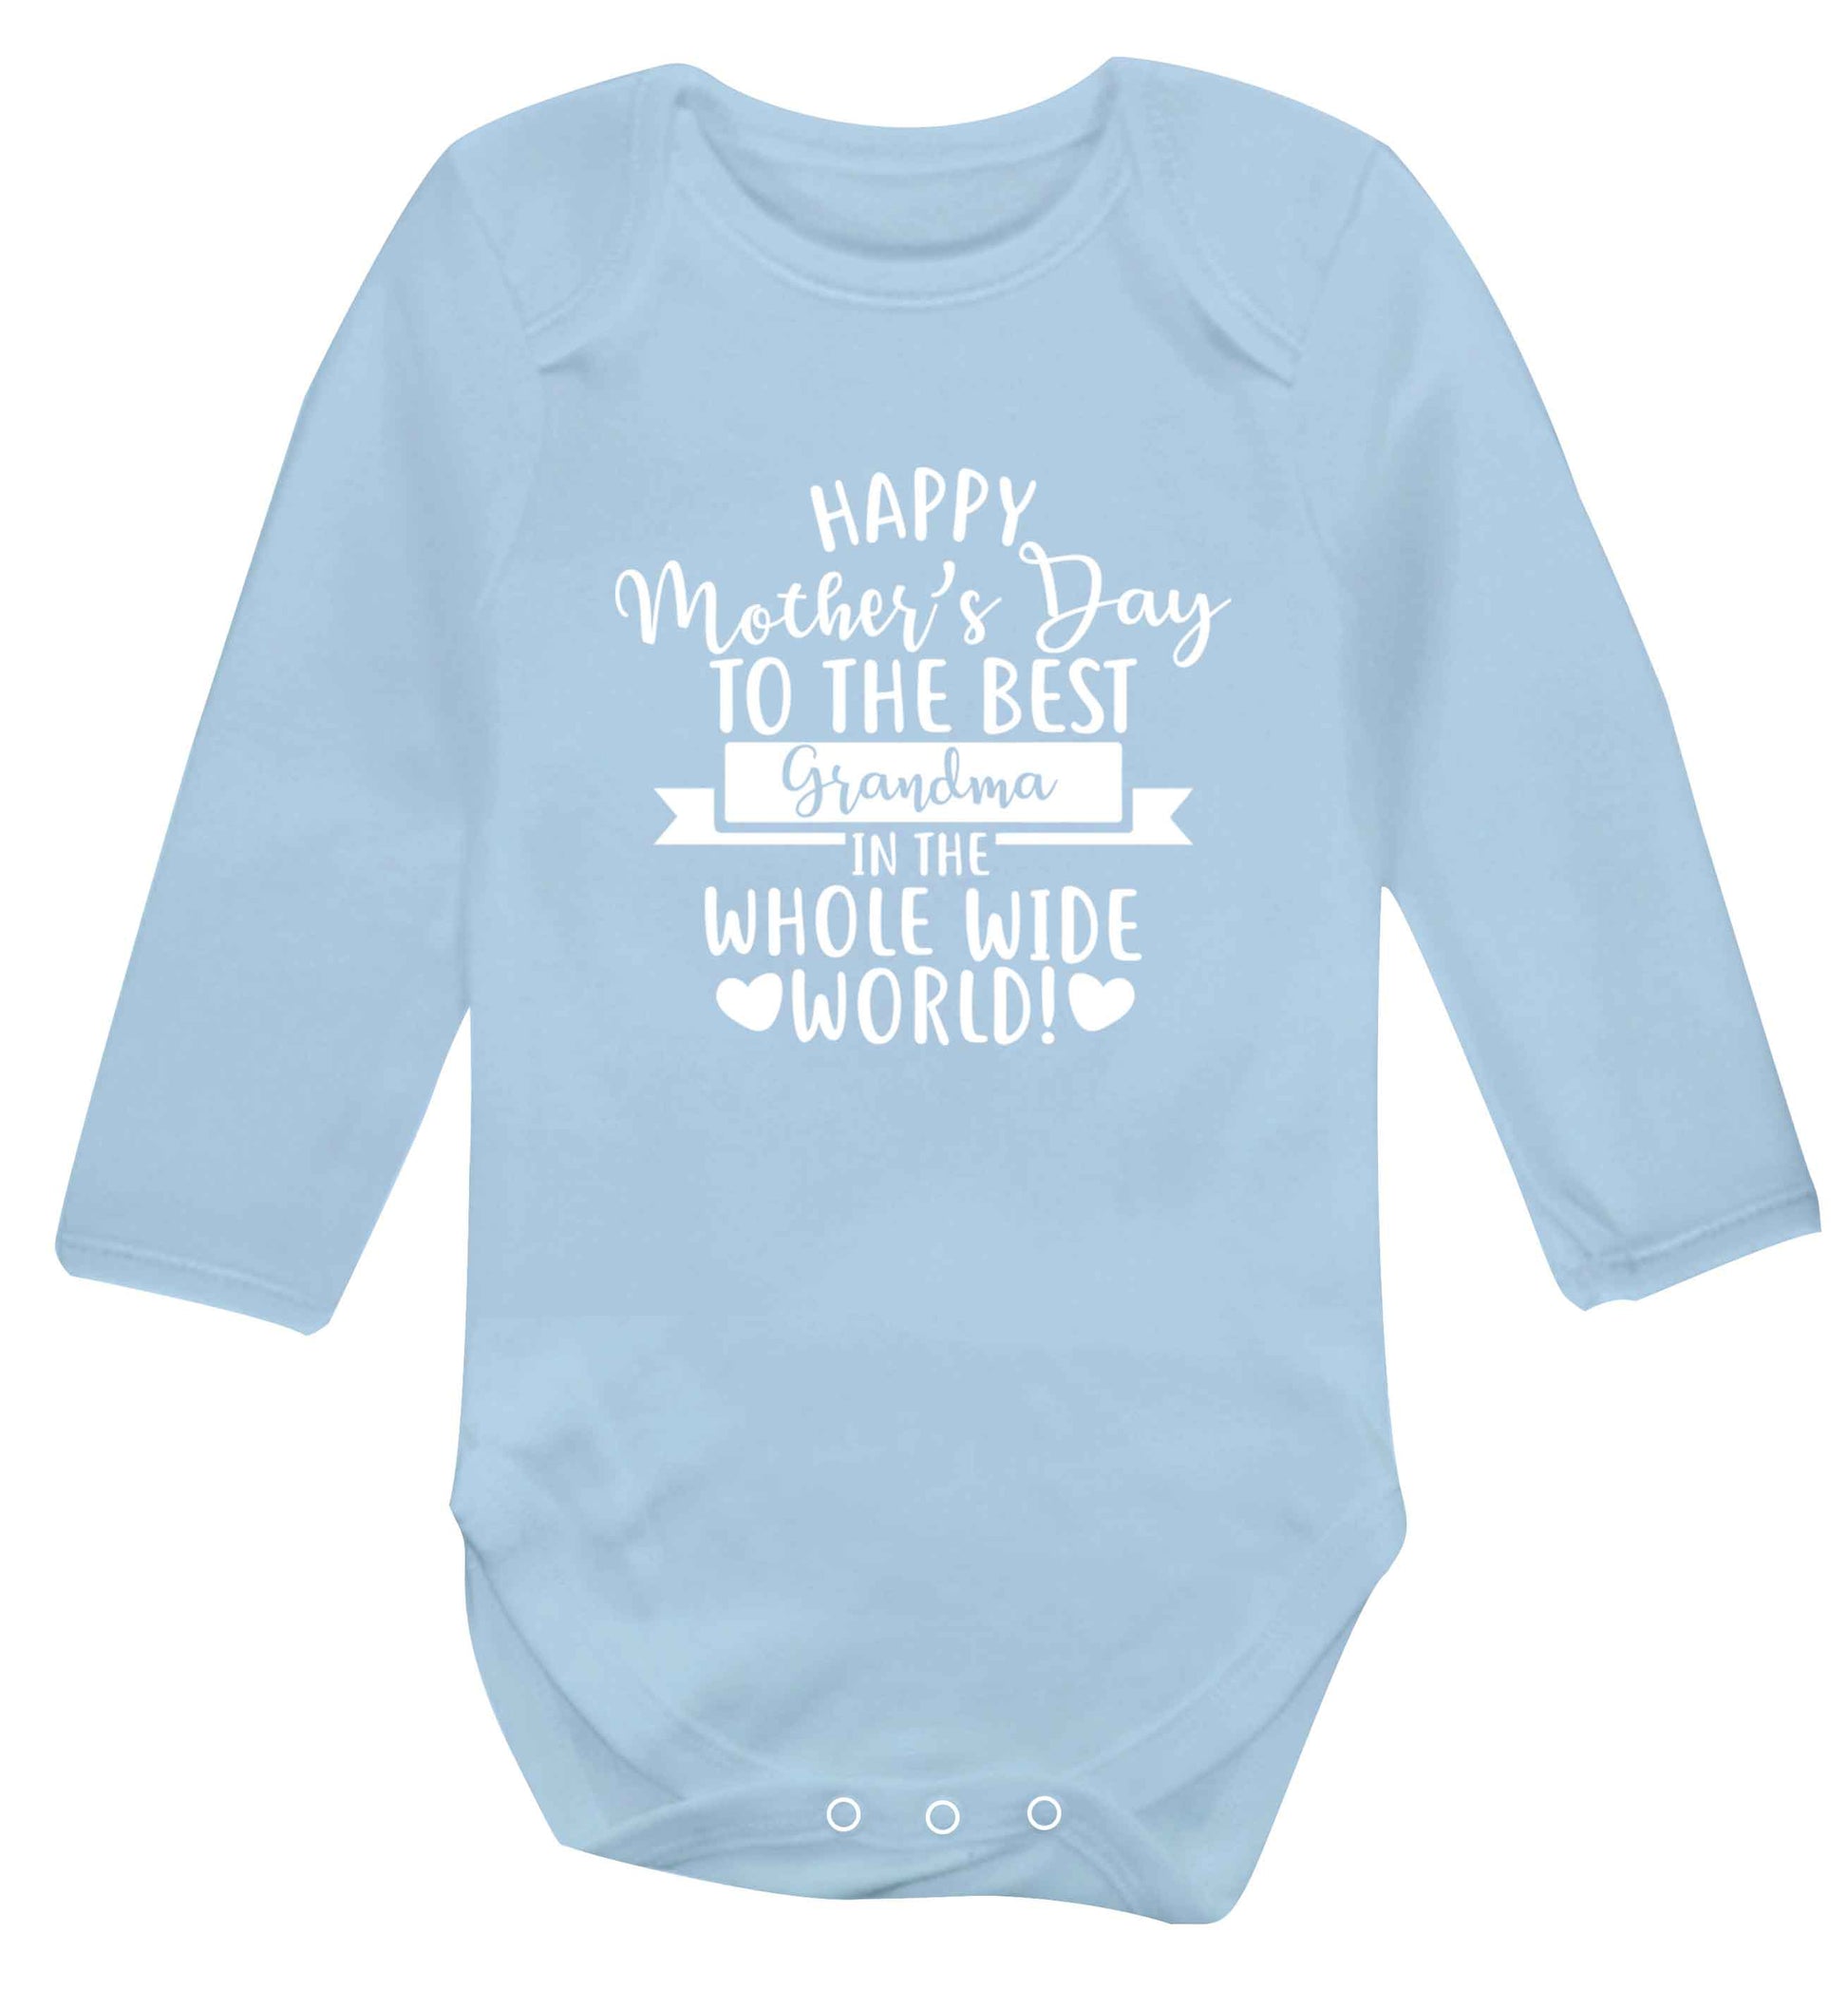 Happy mother's day to the best grandma in the world baby vest long sleeved pale blue 6-12 months